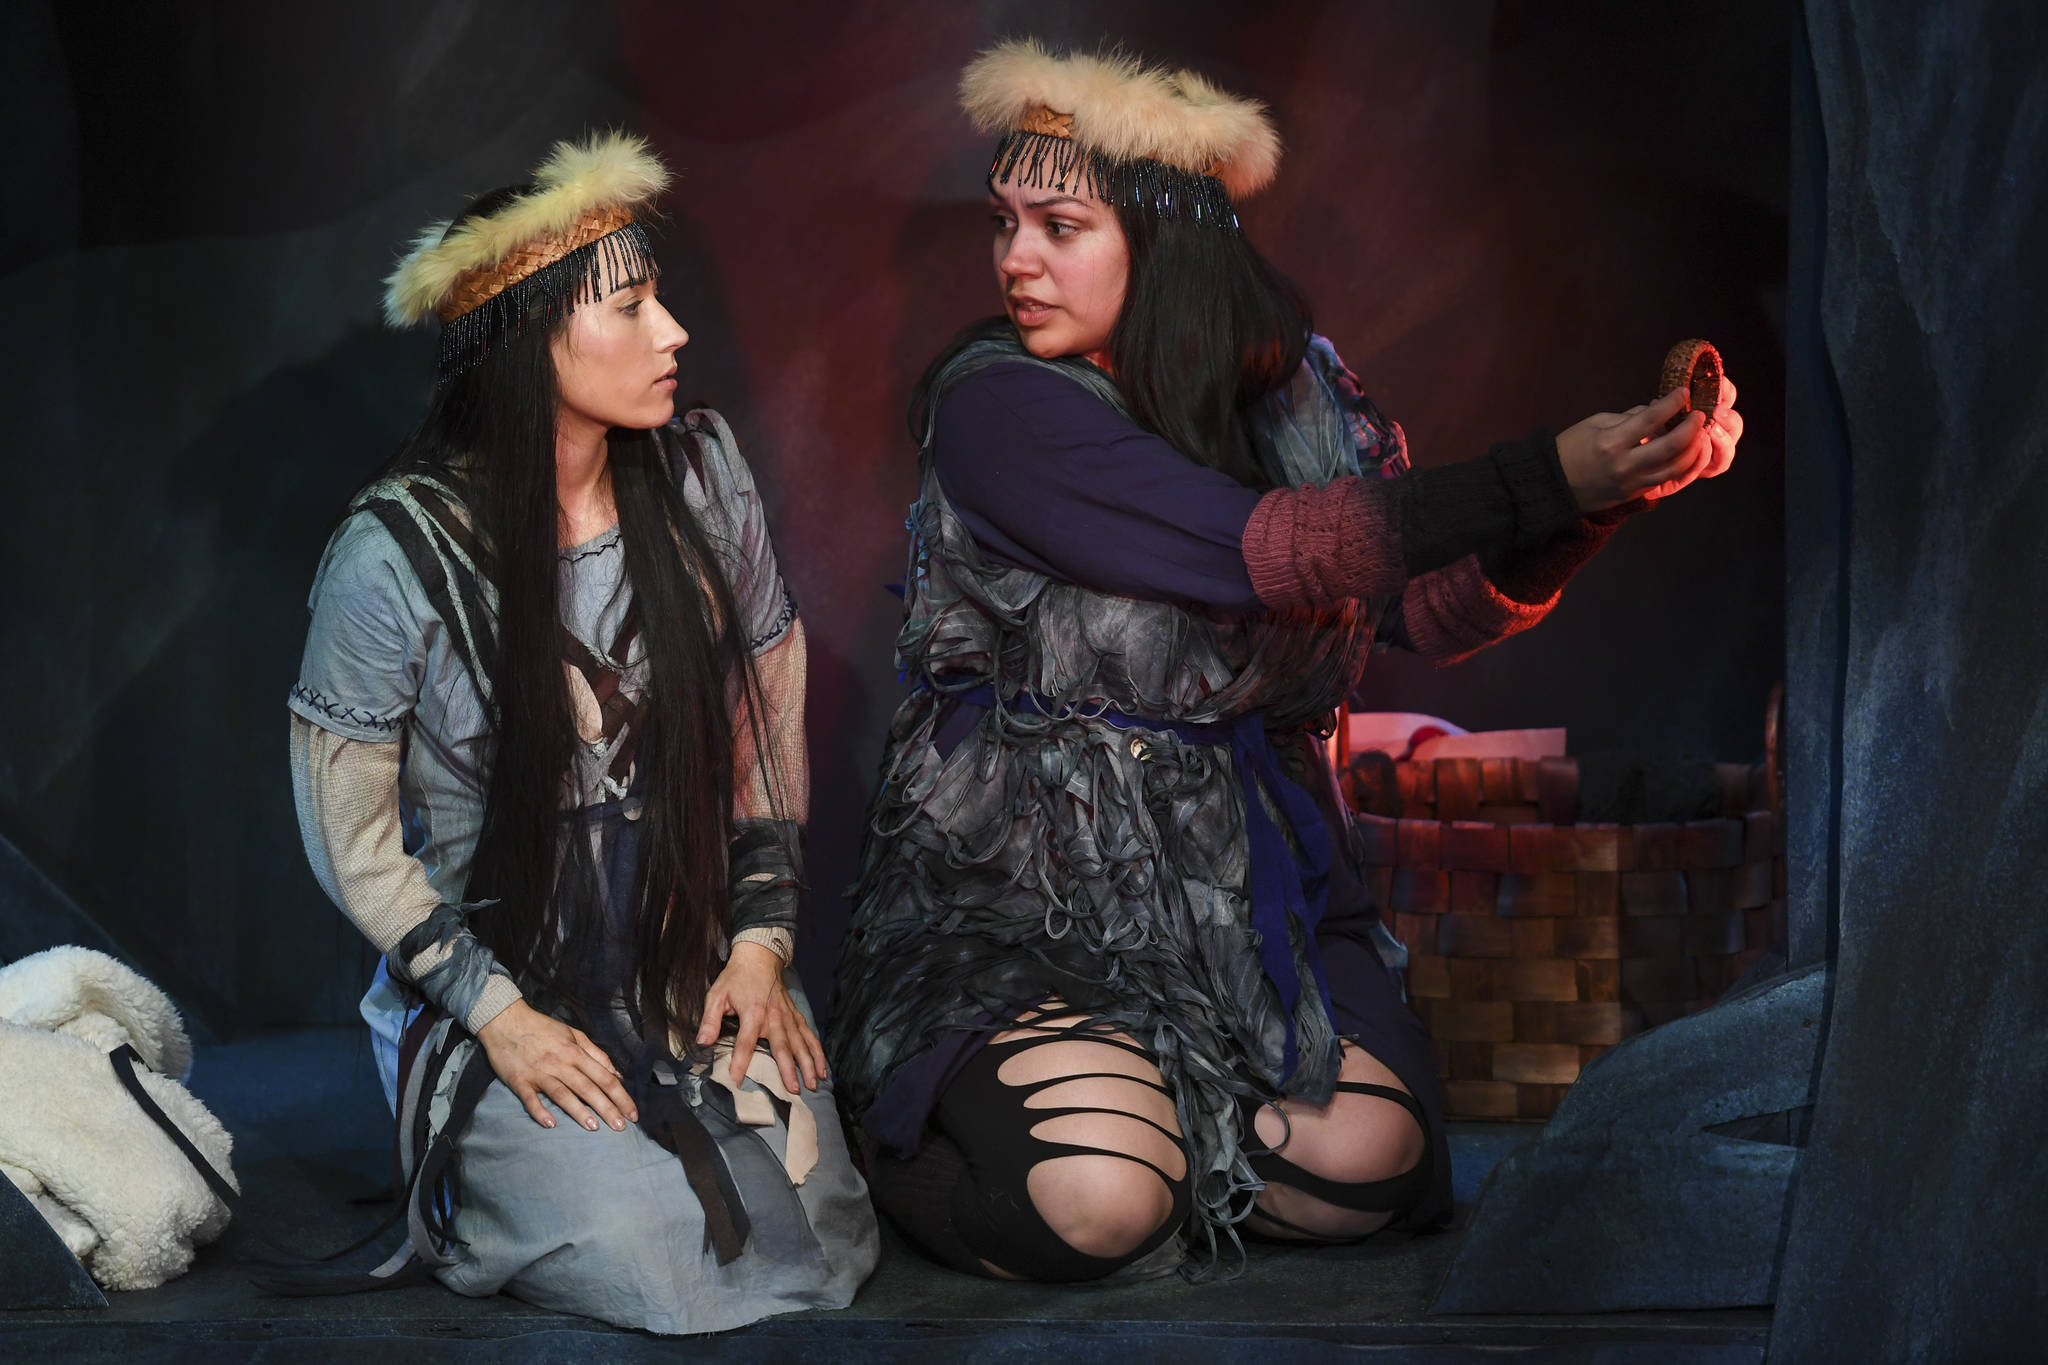 Emily Sera, playing Koontz, left, and Erin Tripp, playing Aanteinatu, rehearse in Perseverance Theatre’s production of “Devilfish” written by Vera Starbard on Tuesday, Sept. 17, 2019. (Michael Penn | Juneau Empire)